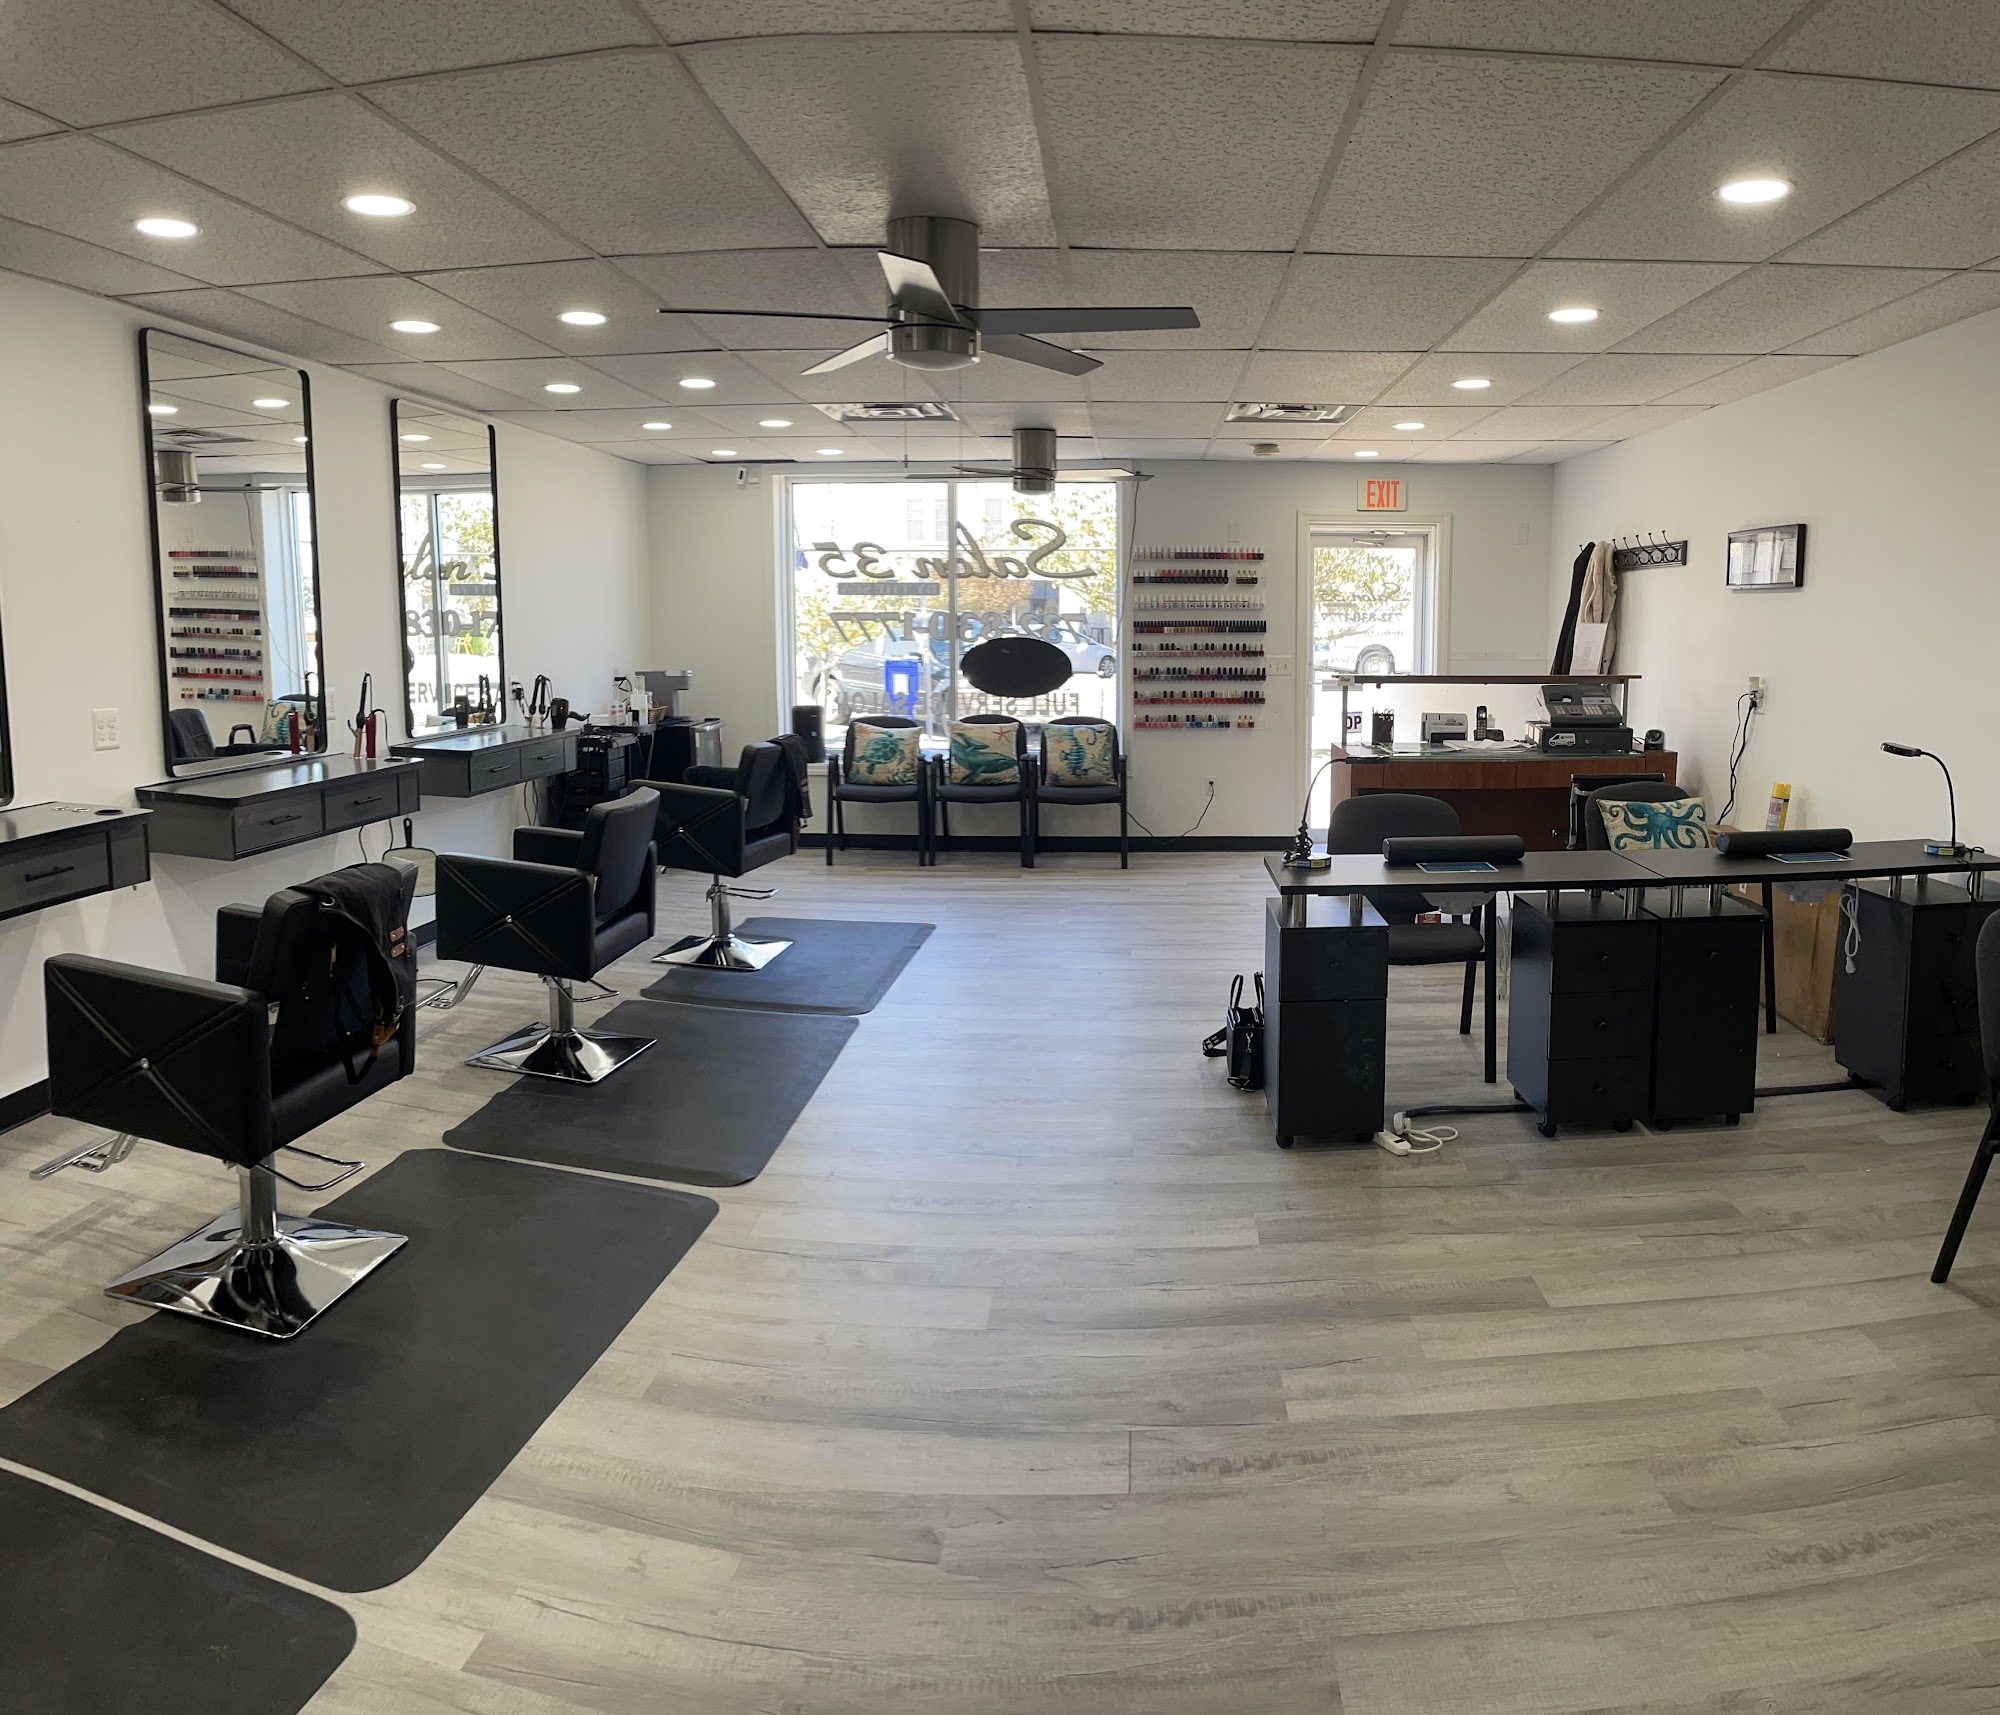 Salon 35 by the Sea 507 Grand Central Ave #2130, Lavallette New Jersey 08735